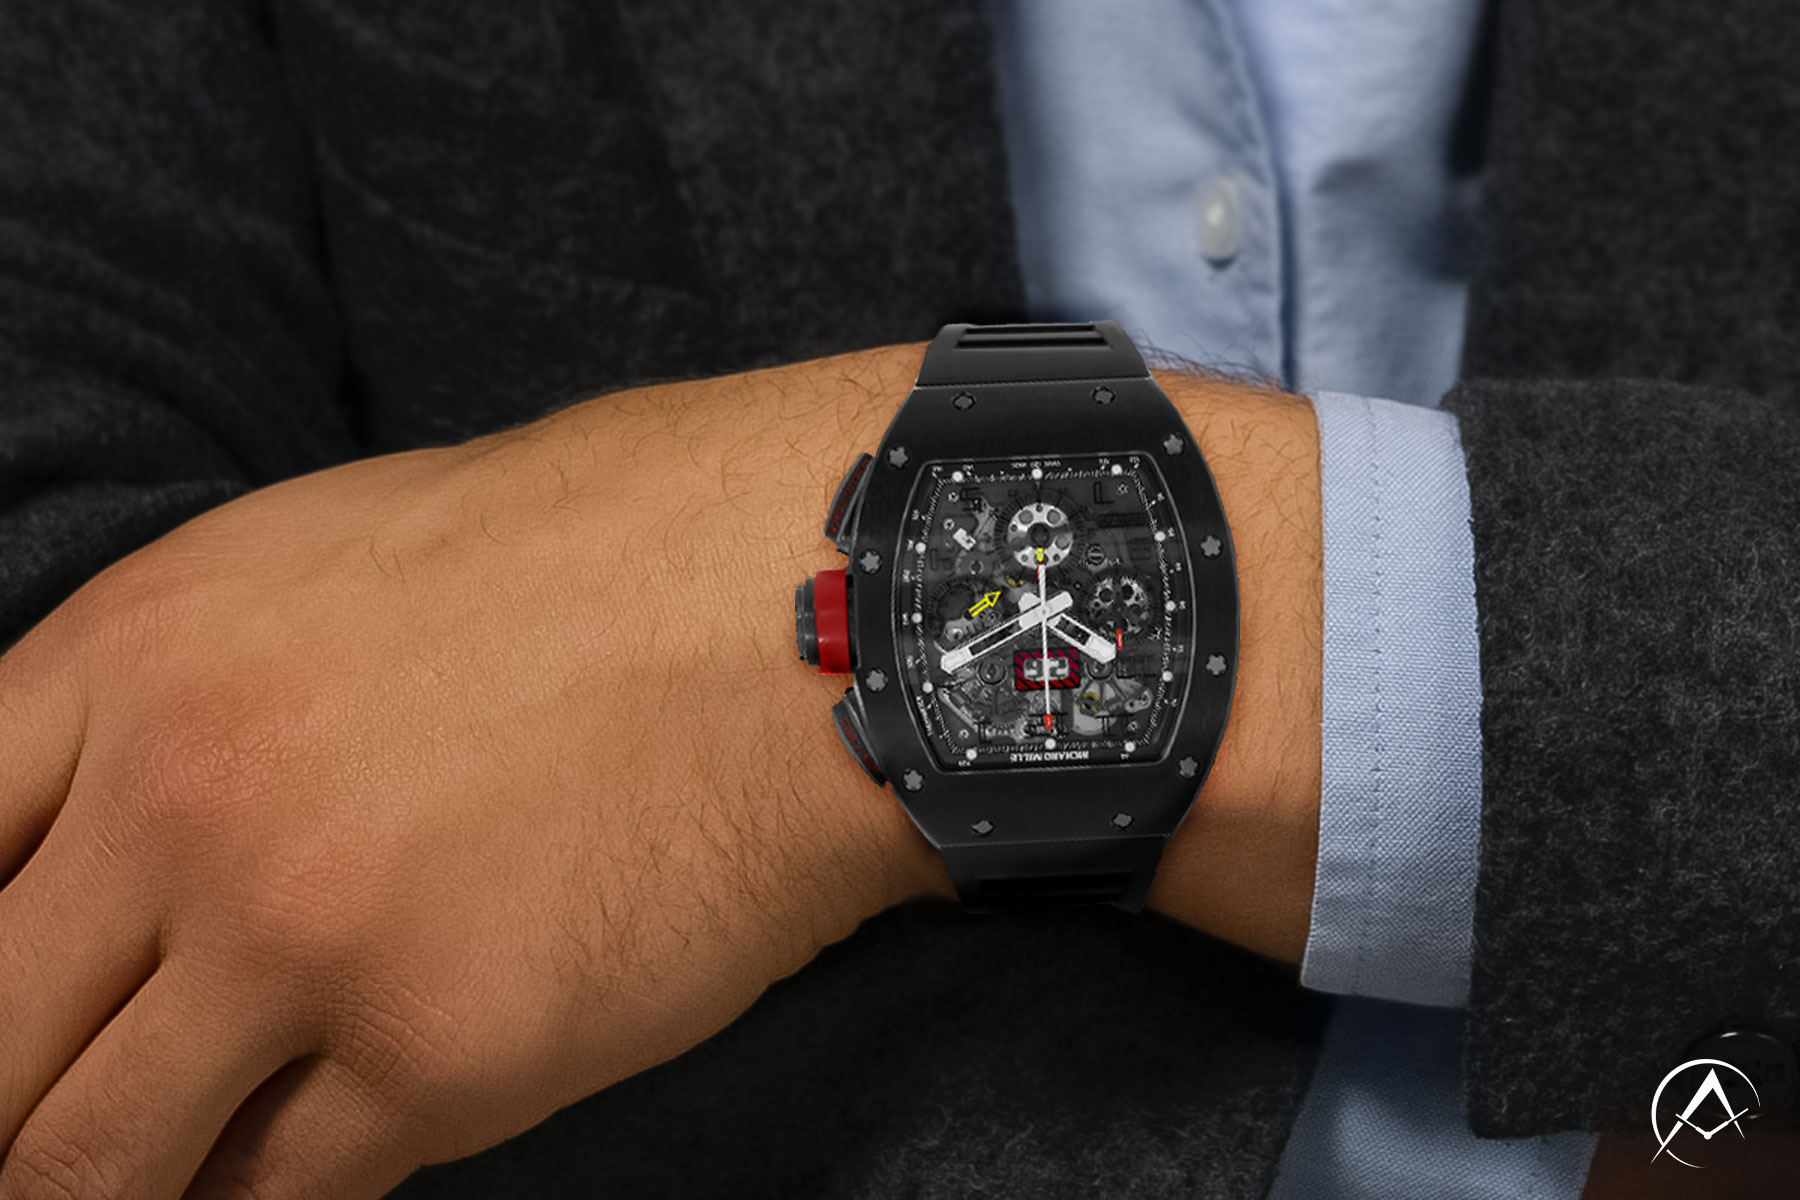 Man Wearing Richard Mille RM 011 on Wrist with Light Blue Button-down Shirt and Gray Suit Jacket.